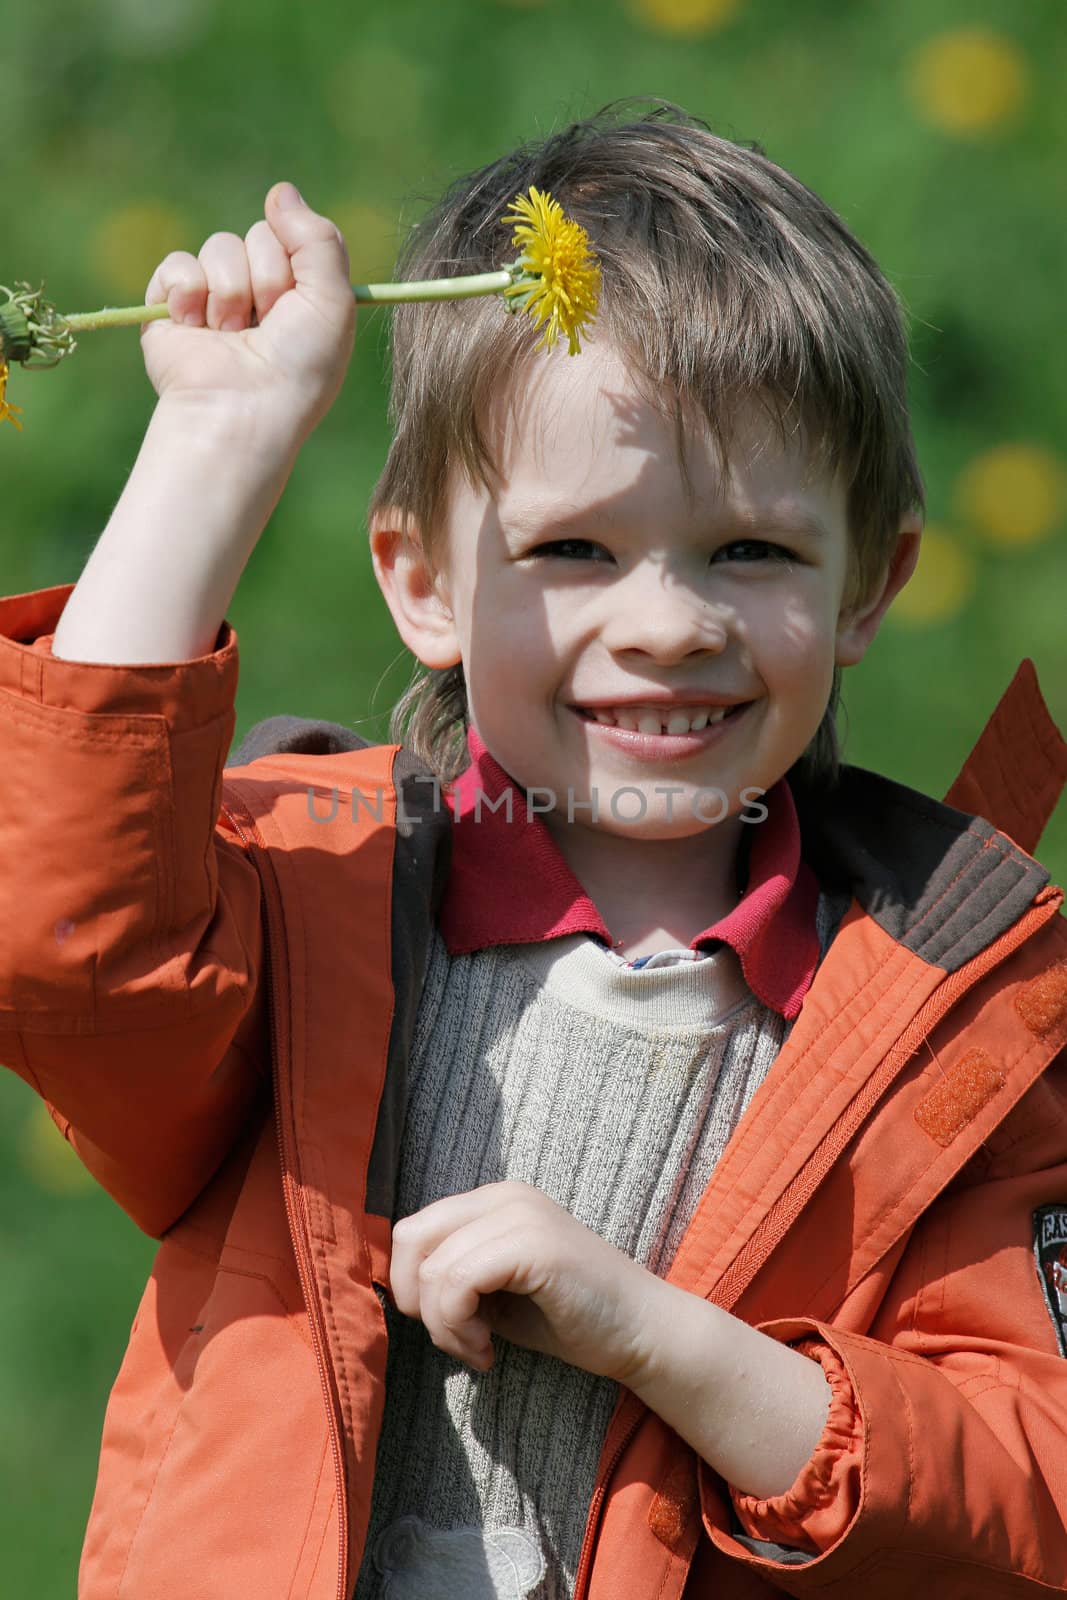 Young boy enjoy summer time in the dandelion meadow.